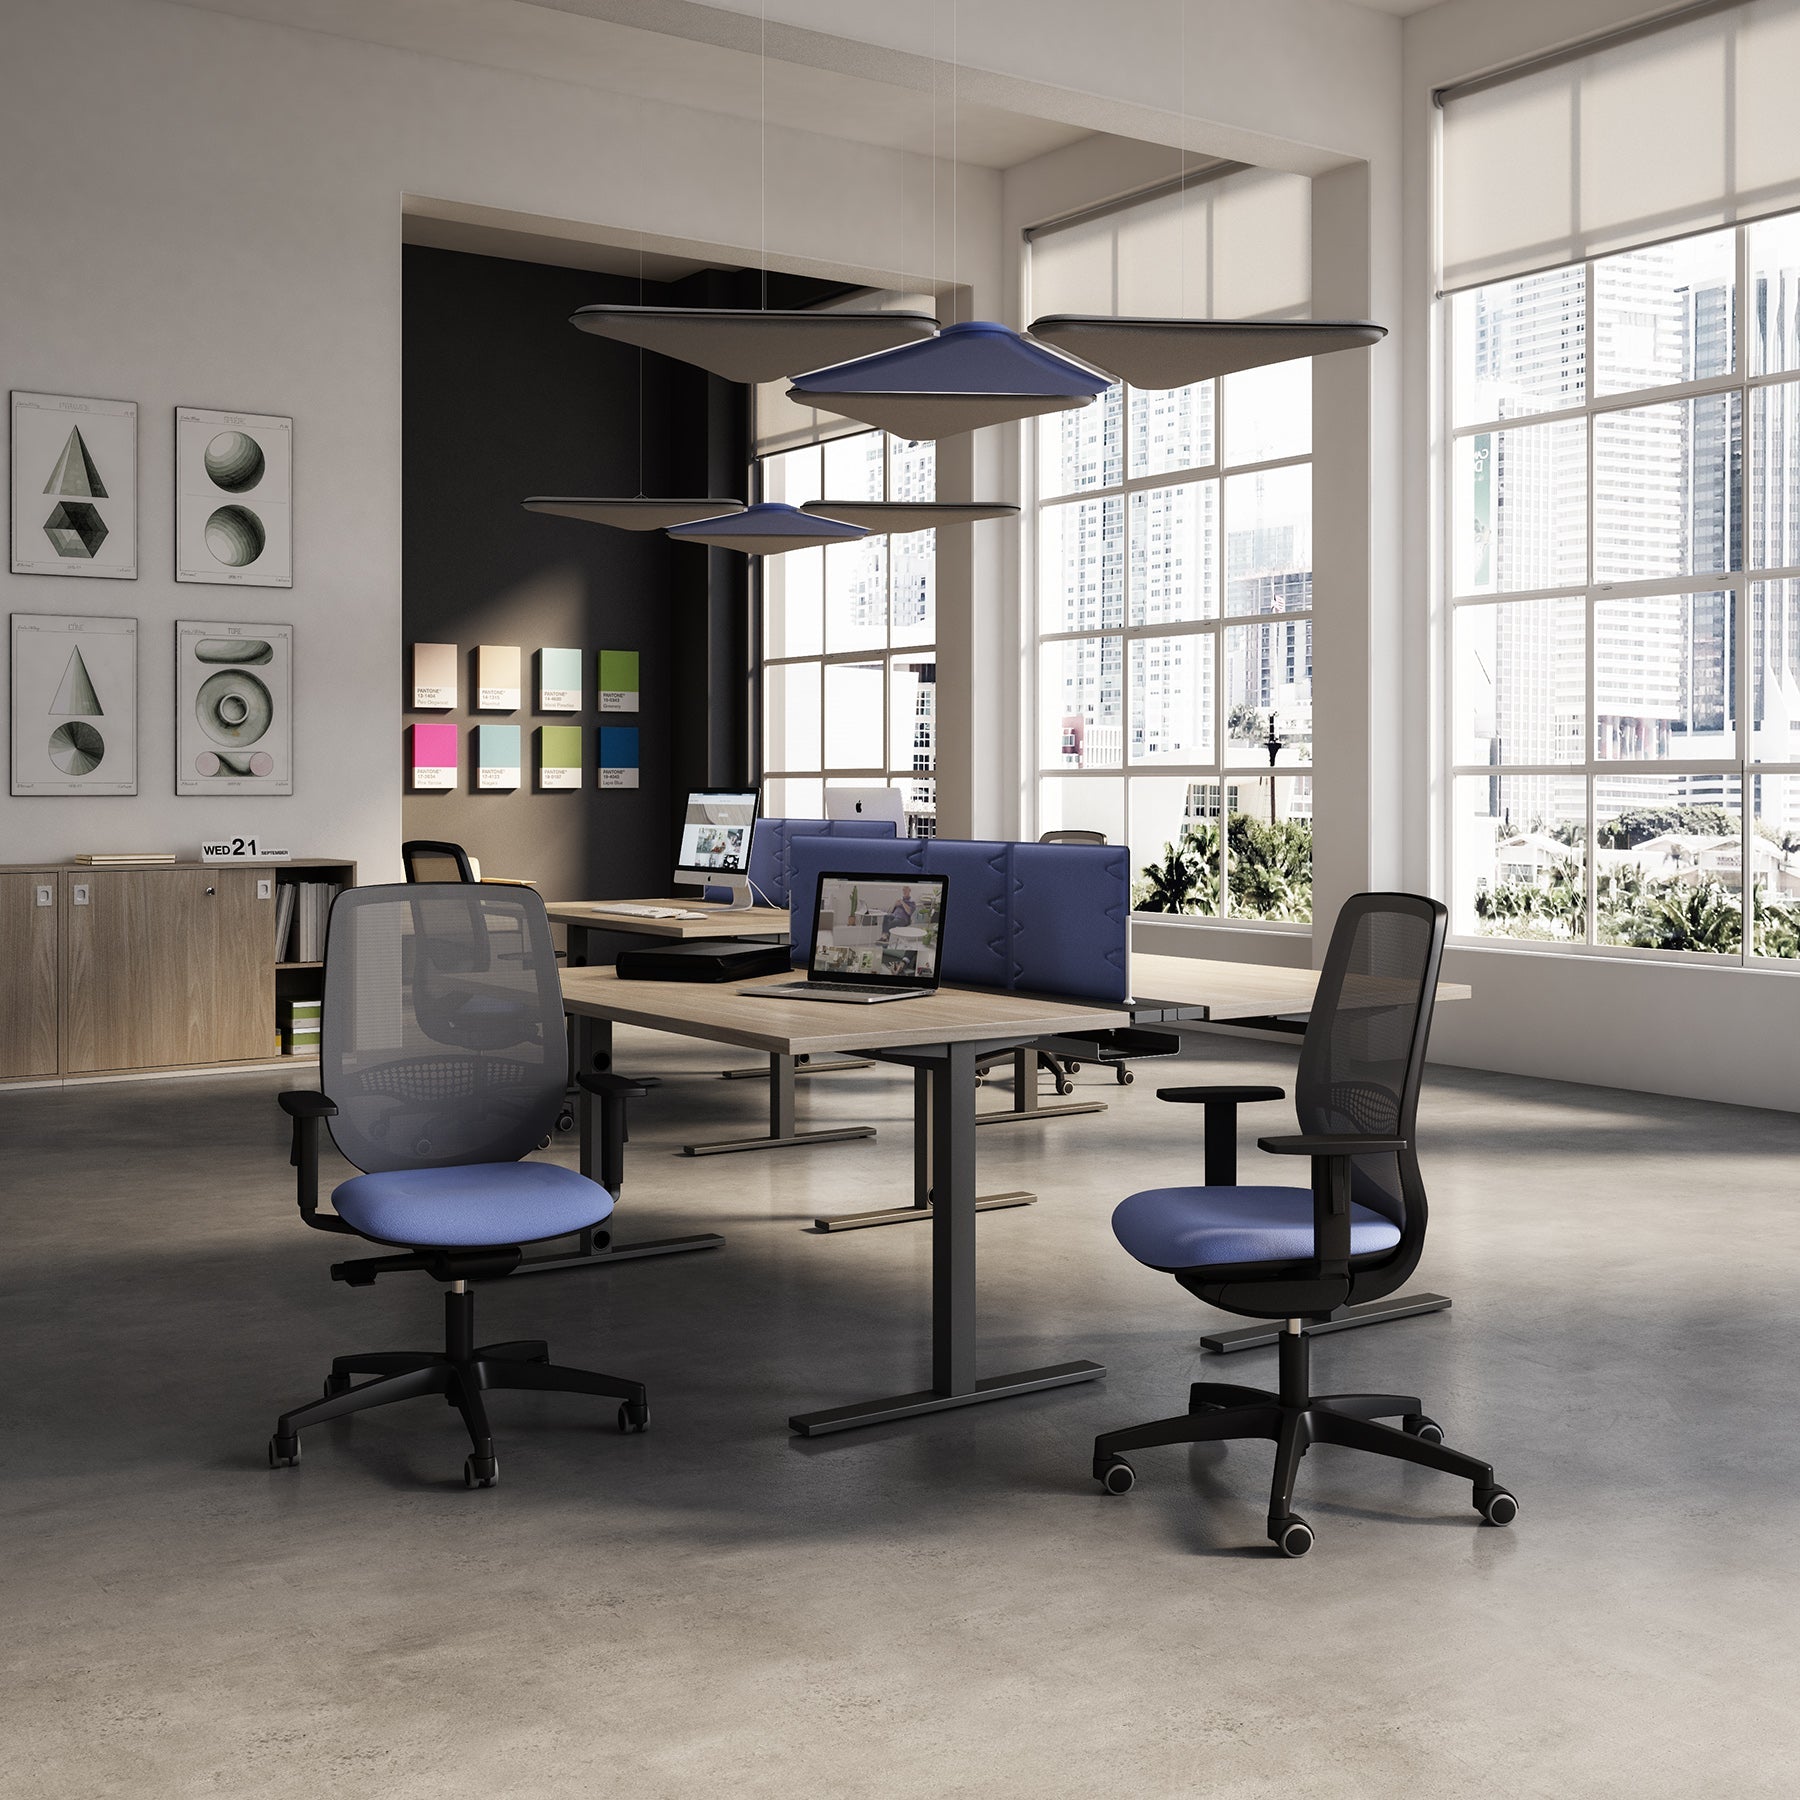 The Complete Guide to Ergonomic Desk Chairs